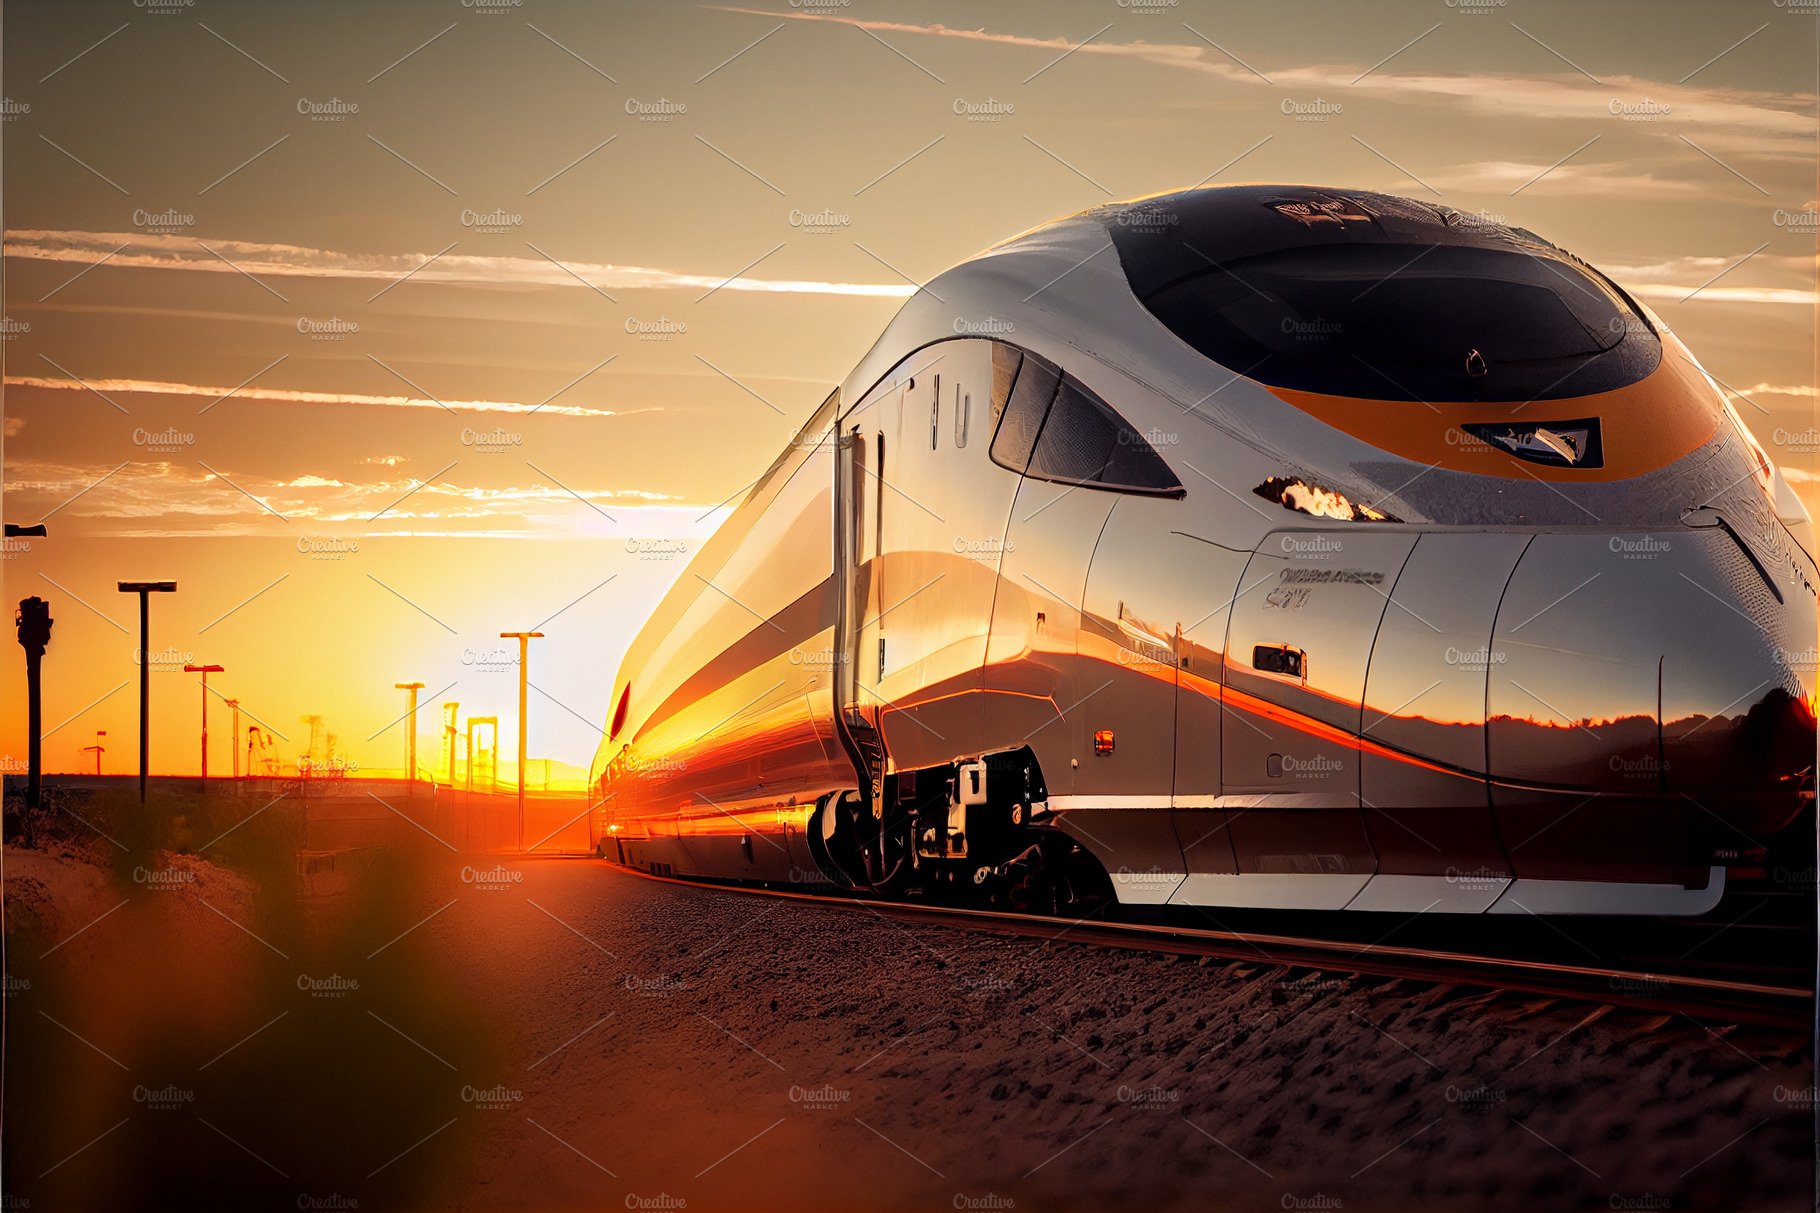 High speed train in motion at the railway station at sunset in Europe. Mode... cover image.